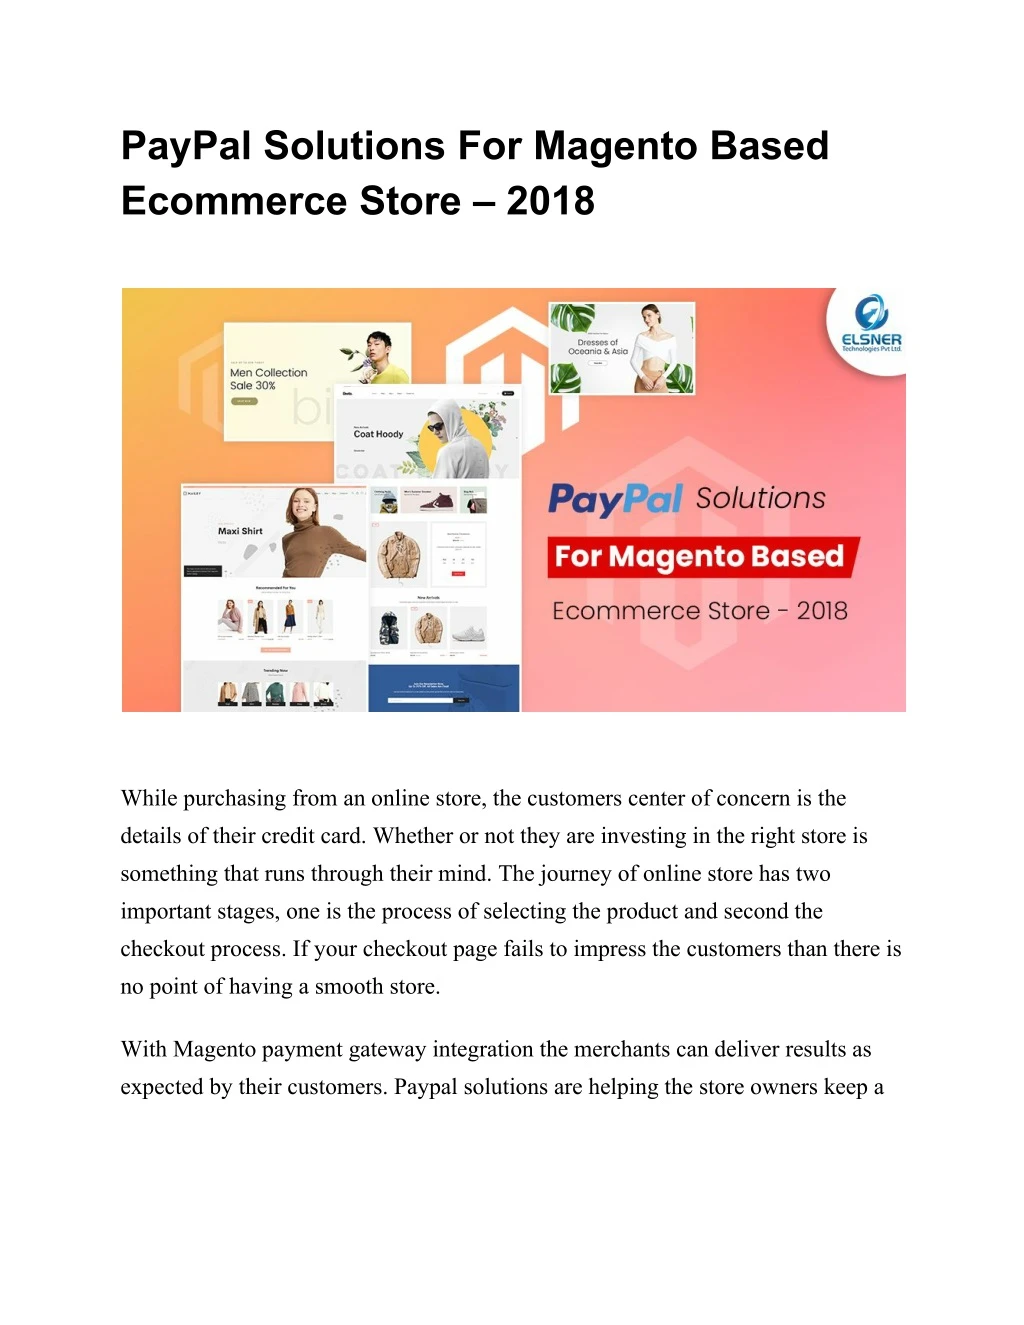 paypal solutions for magento based ecommerce